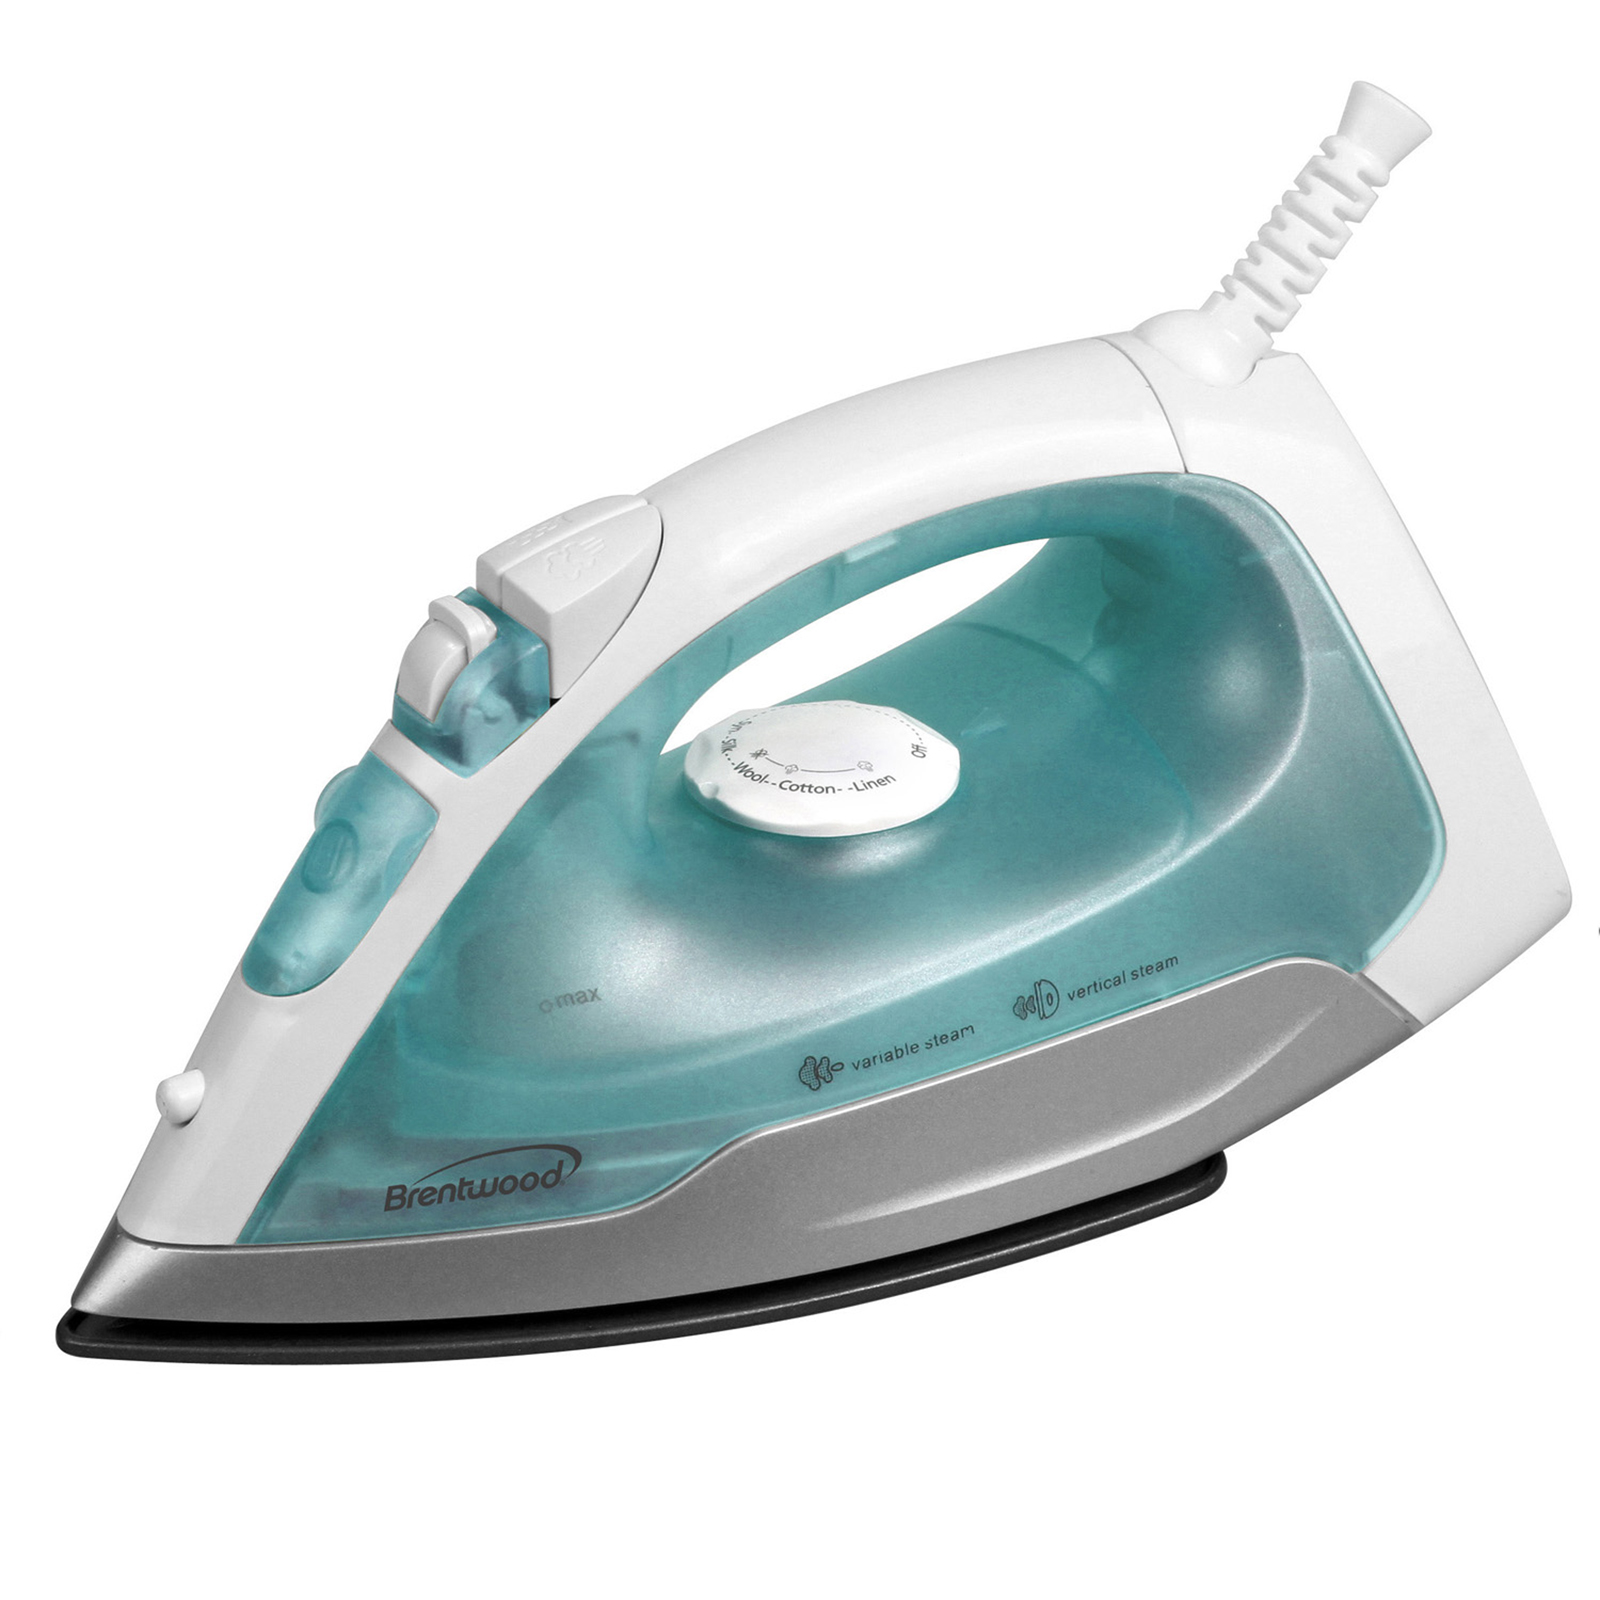 Brentwood 97083301M Steam/Dry/Spray/Non-Stick Coating Iron